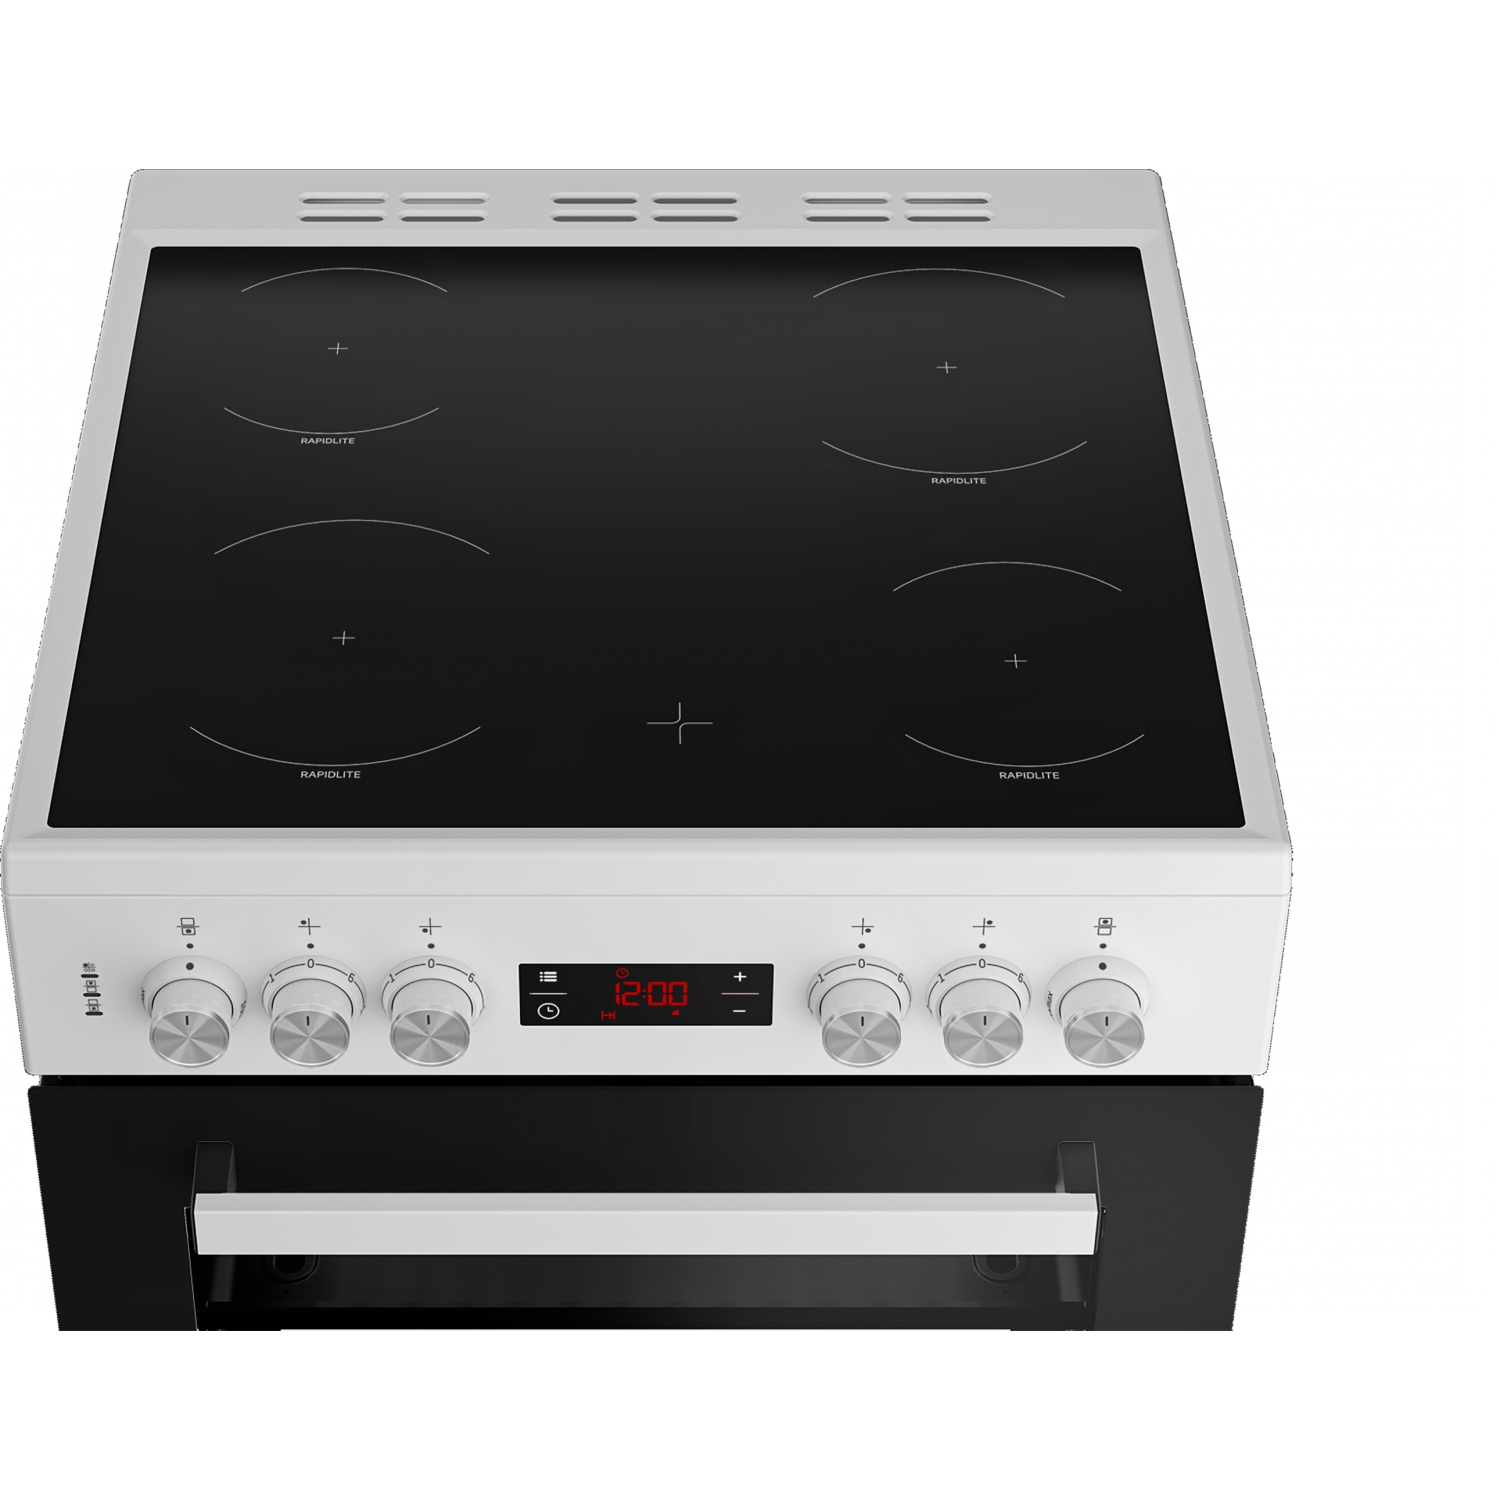 Beko EDC634W 60cm Double Oven Electric Cooker with Ceramic Hob - White - 3